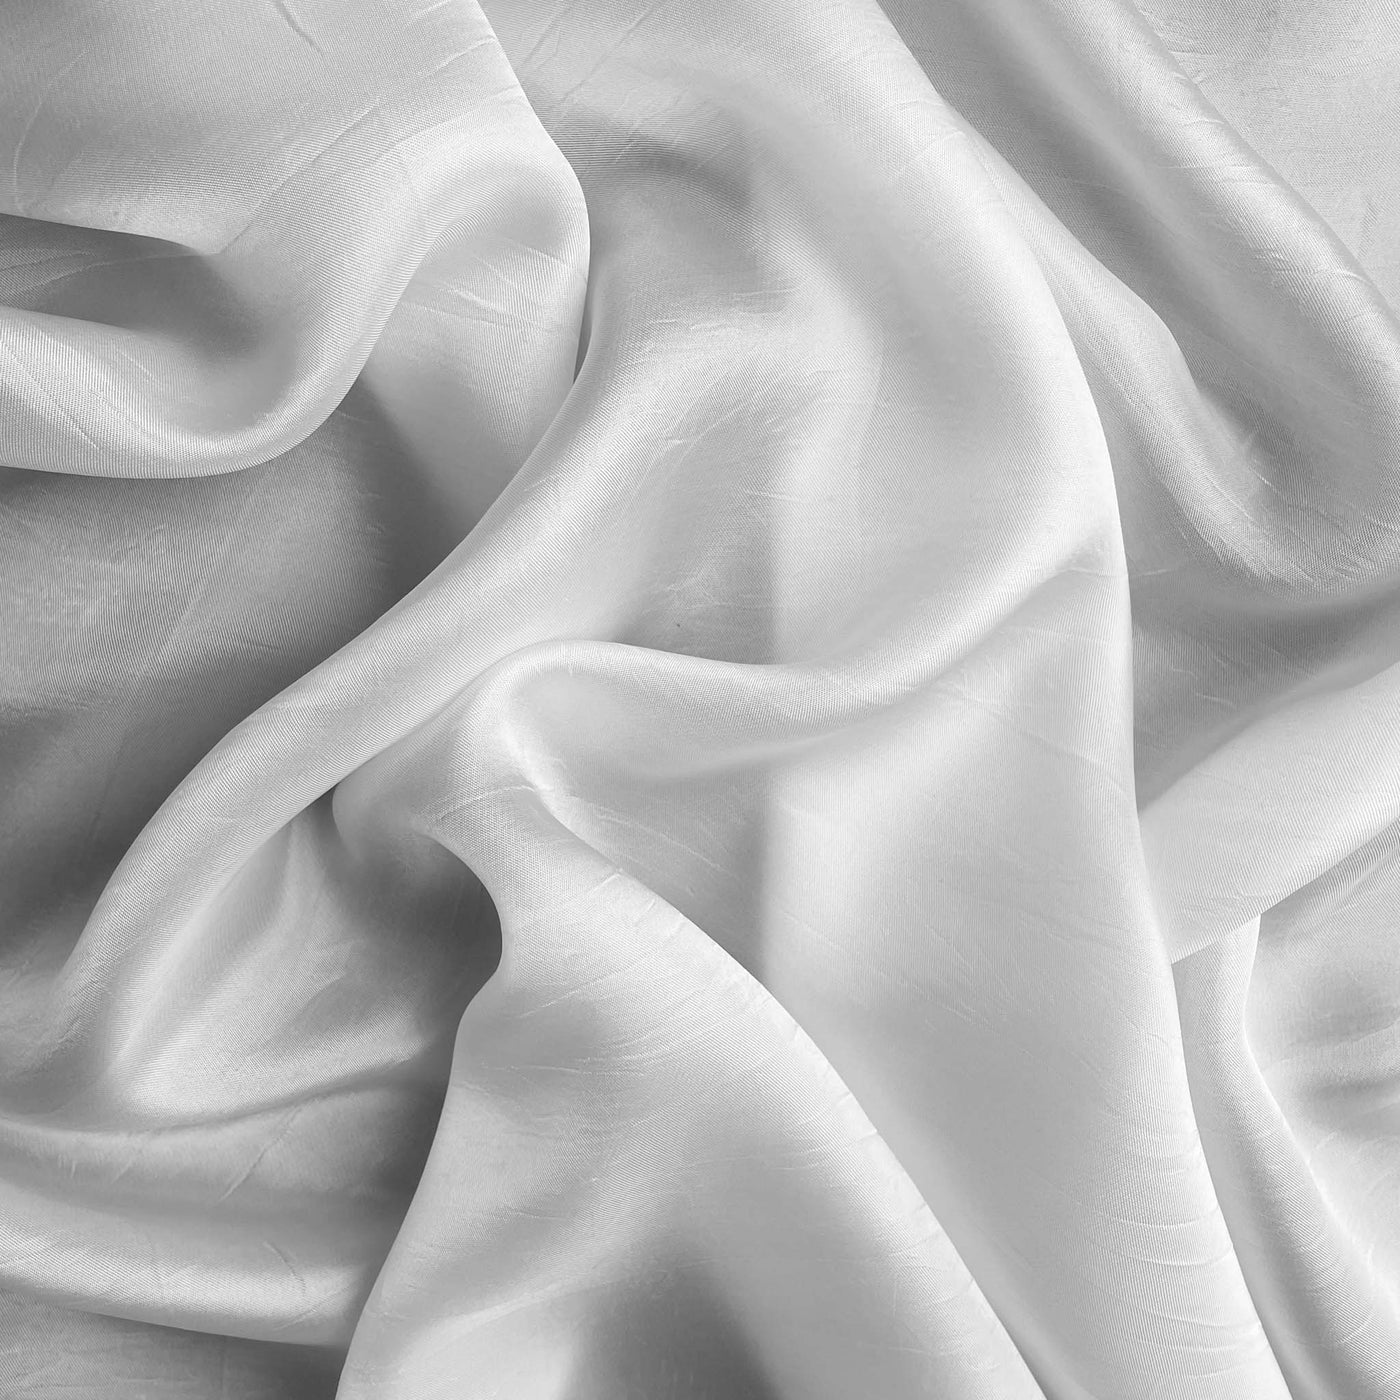 Fabric Pandit Fabric White Dyeable Pure Bemberg Fine Satin Plain Fabric (Width 44 Inches, 95 Gms)